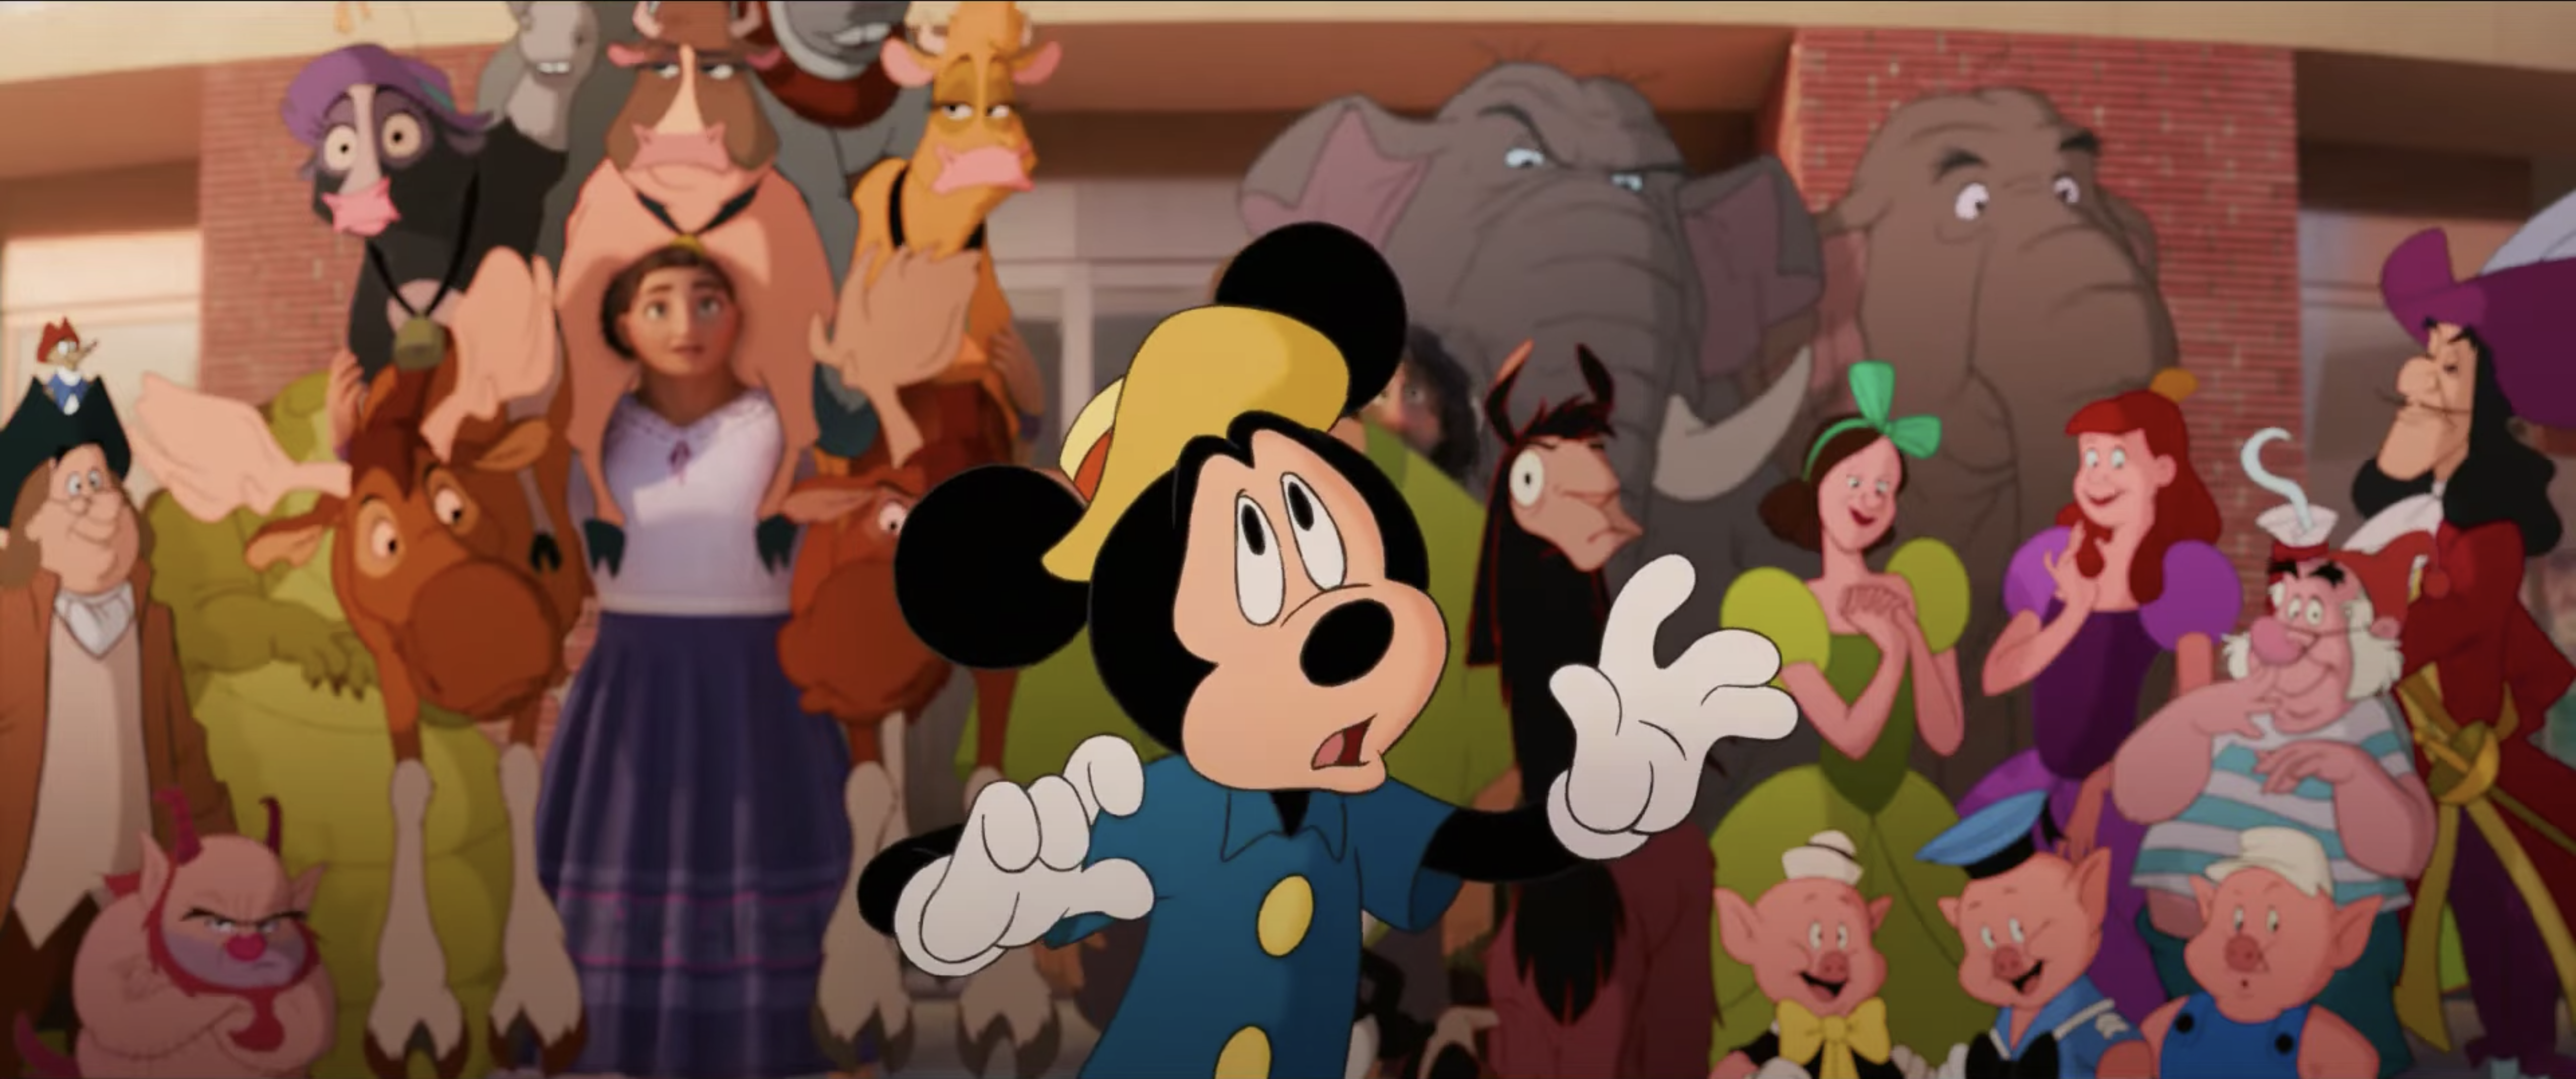 Photo courtesy of Walt Disney Animation Studios Iconic Disney mascot Mickey Mouse and others anxiously await their group photo in Disney’s animated short entitled ‘Once Upon A Studio’ aired Oct. 15 on ABC.